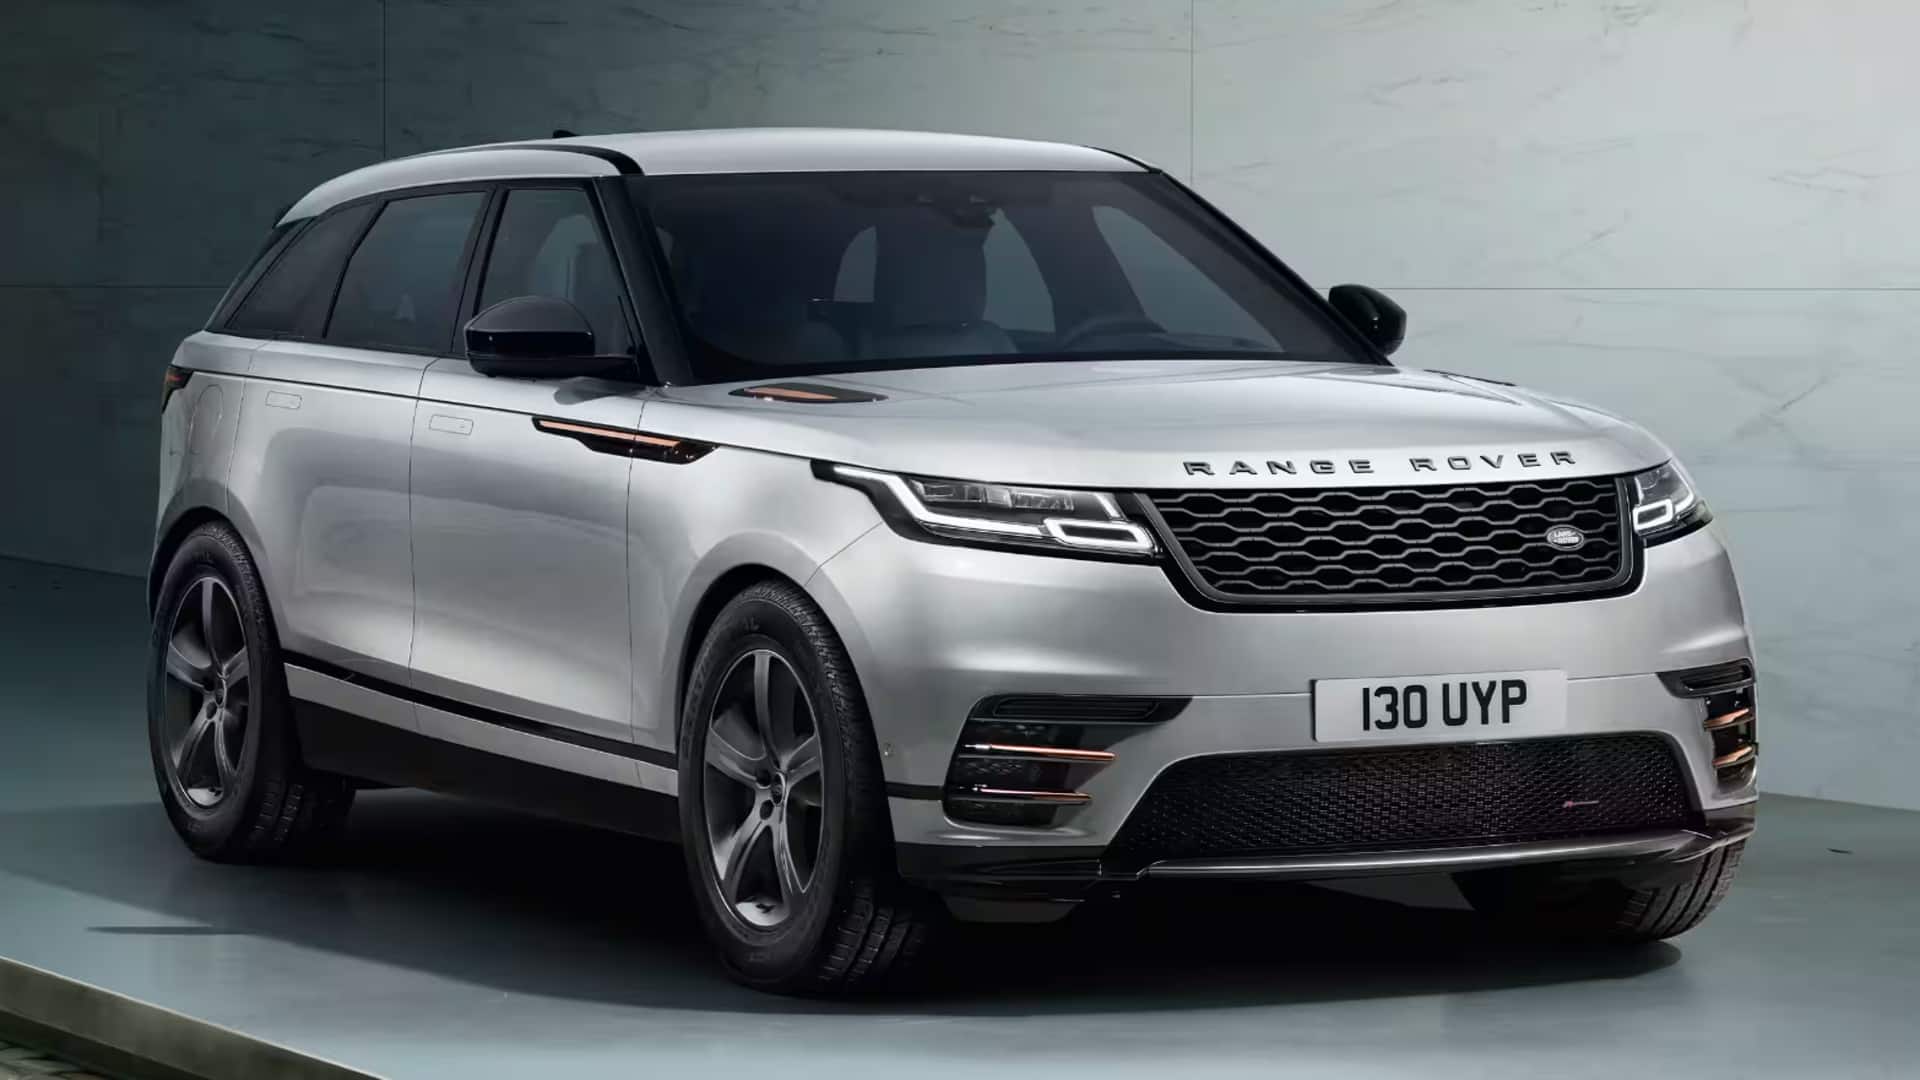 New-generation Velar will be the first pure-electric Land Rover car